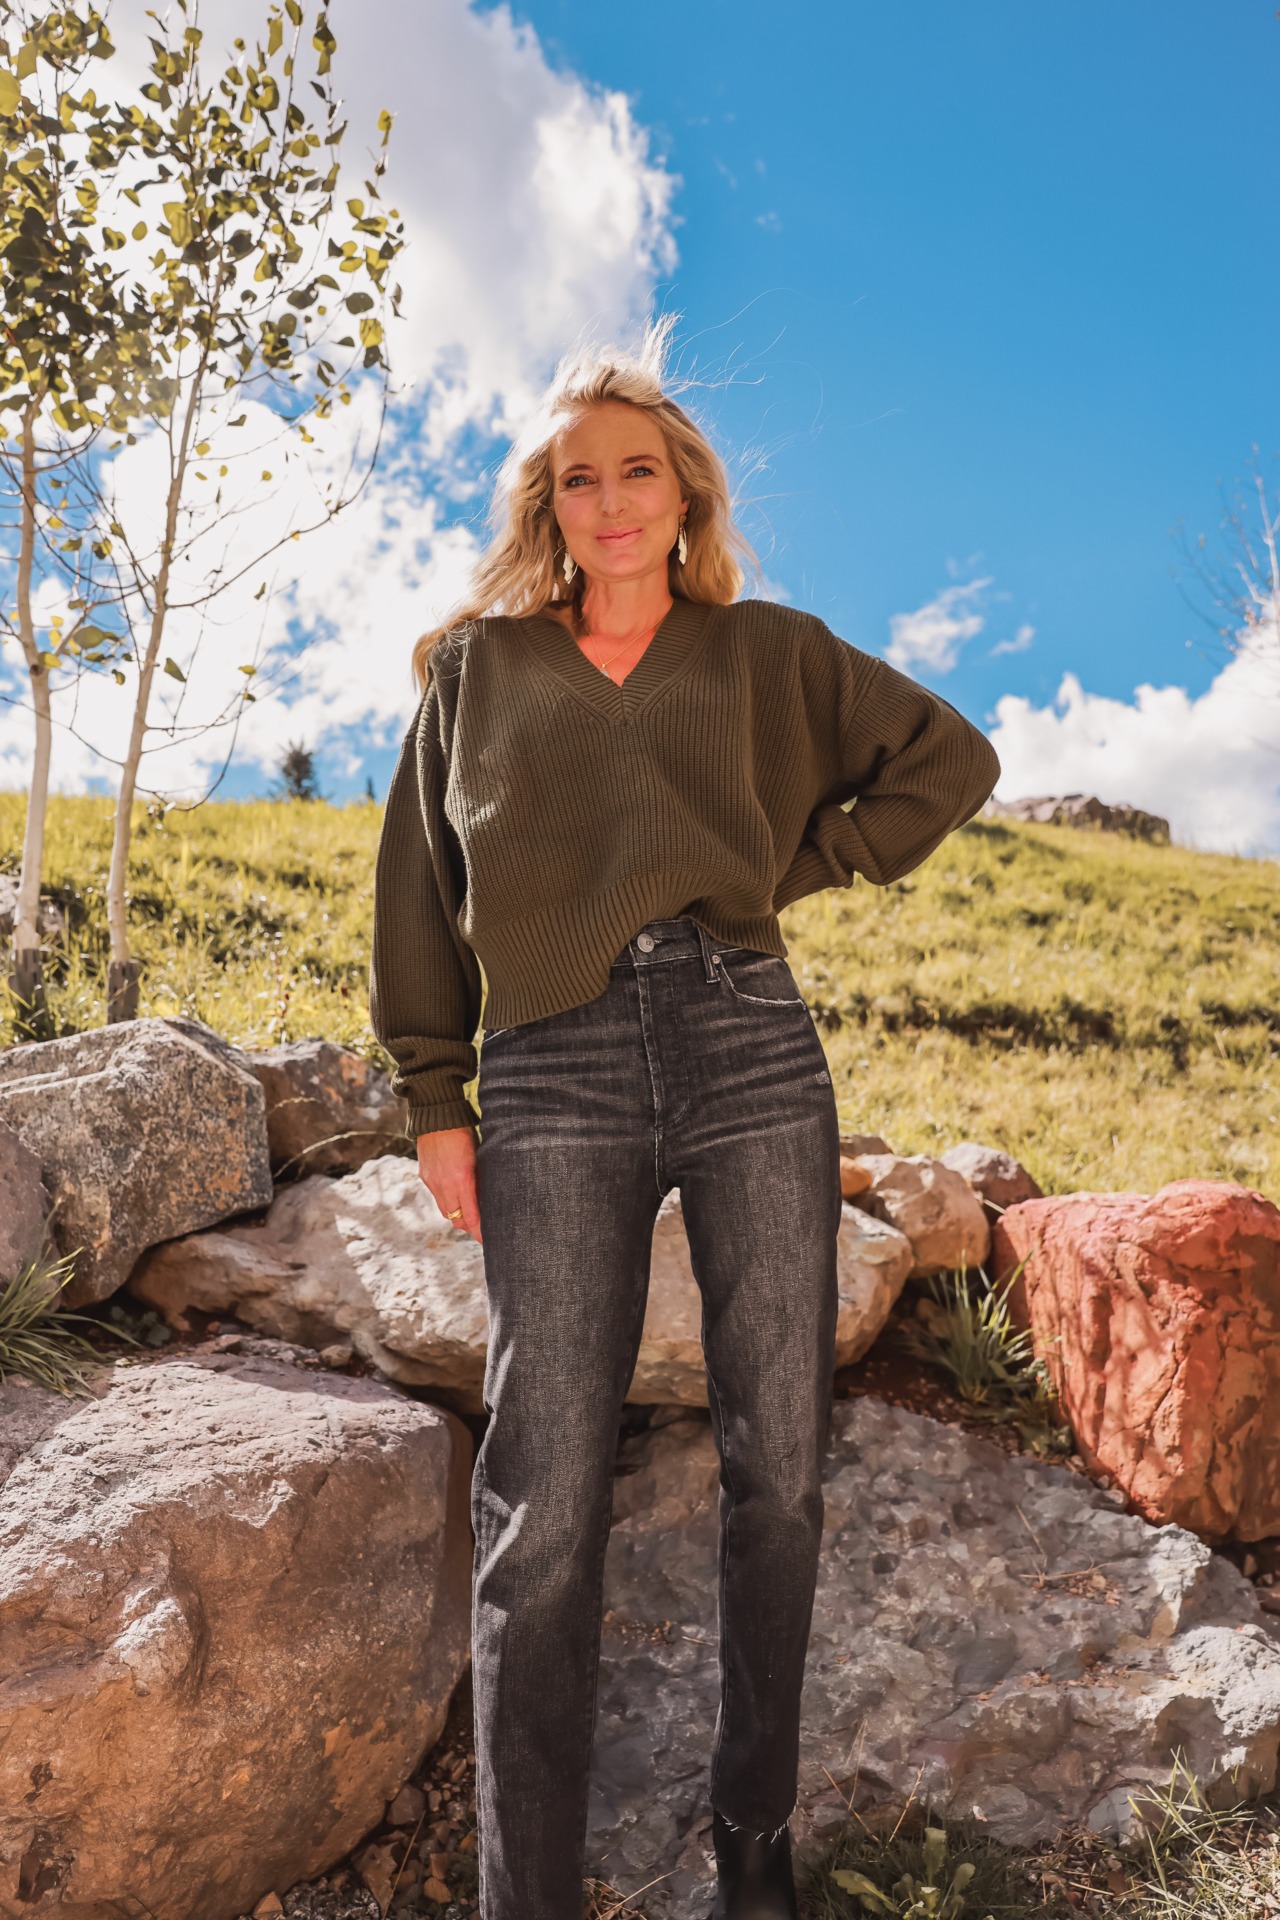 evereve wideleg and cropped denim trends, beauty finds, faovite beauty picks, erin buseee, fashion blogger over 40, telluride, CO, women feeling unworthy, feeling unworthy over 40, we need to talk about feelings of unworthiness, how to feel worthy, women over 40 self care